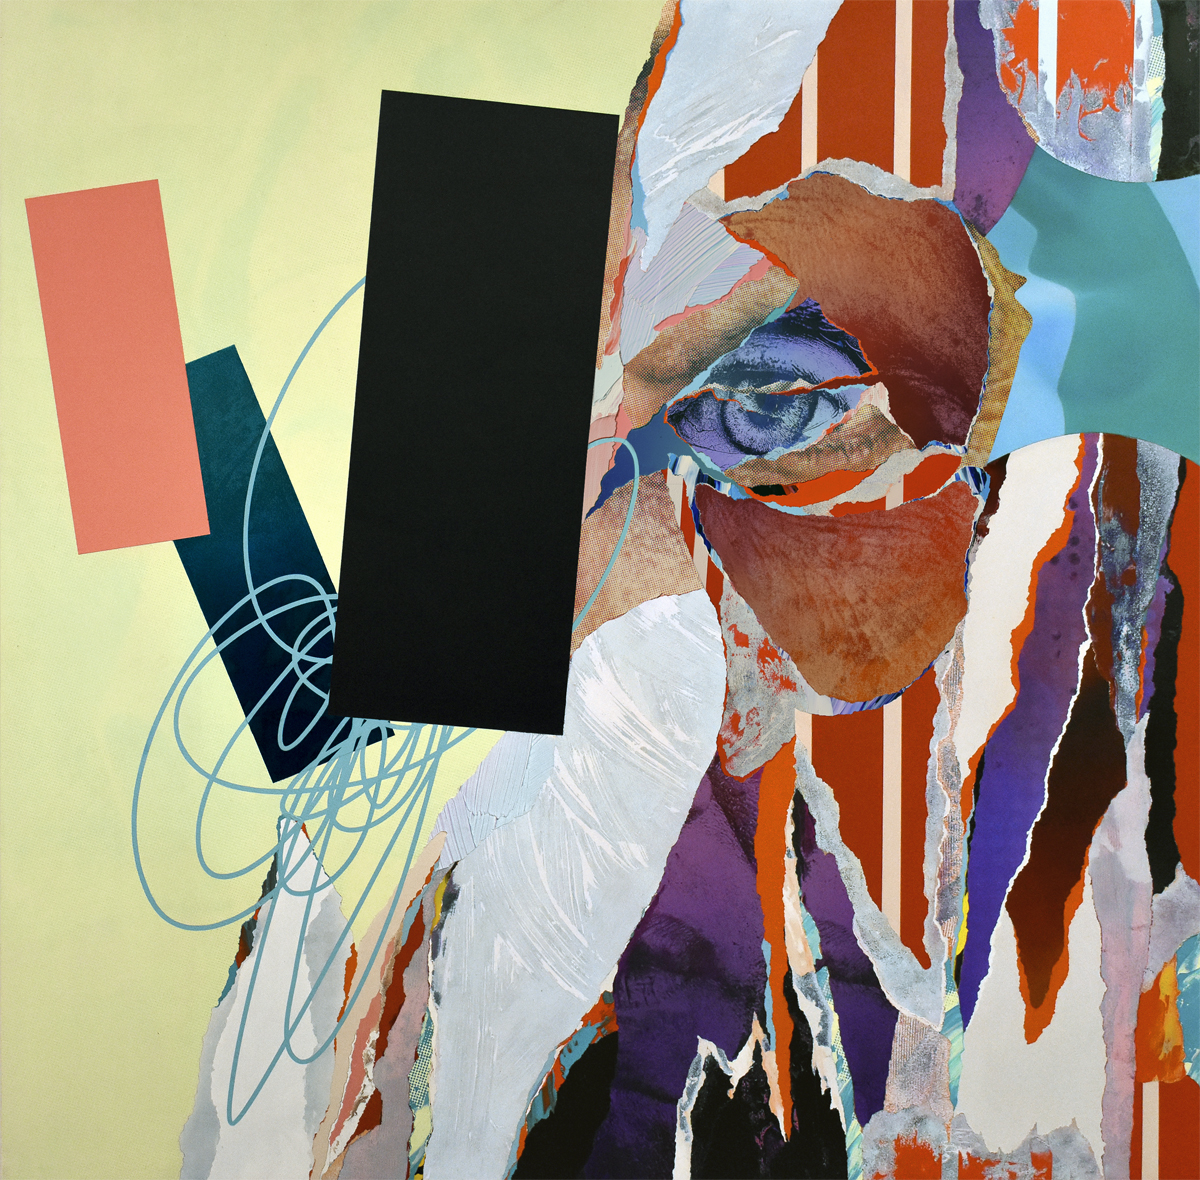 Jeff_Vreeland-1_St_Macarius_the_Younger_and_Grandpas_Black_Licorice_2015_Painting